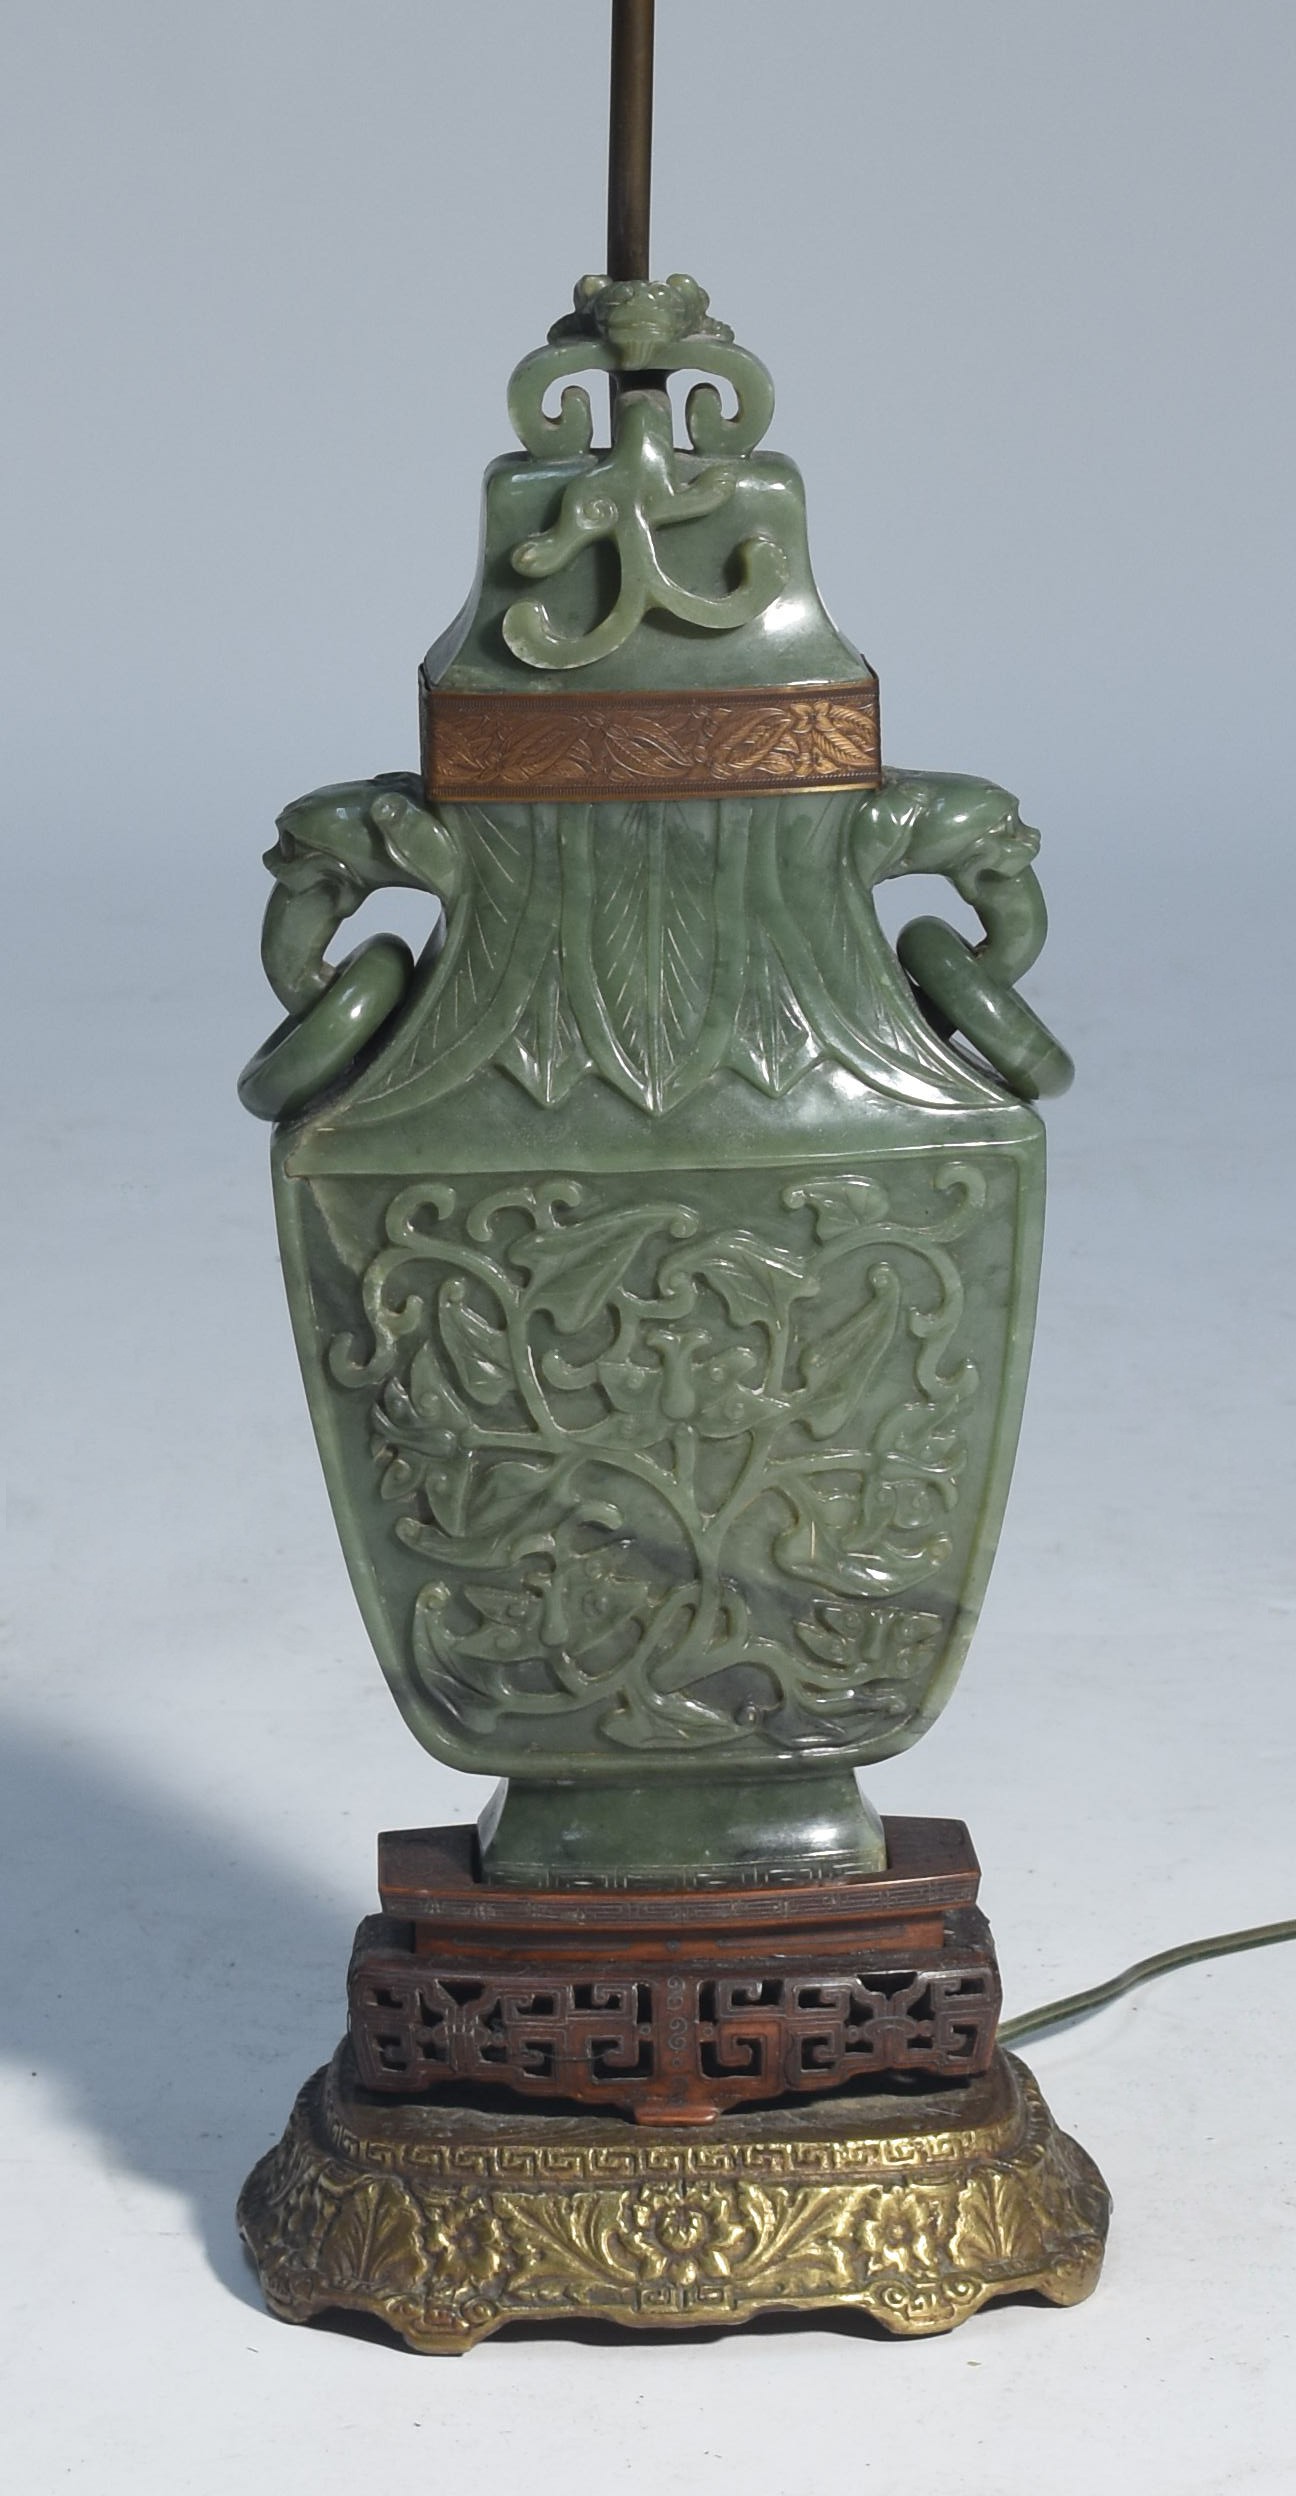 Large Chinese jade urn converted to lamp with carved handles